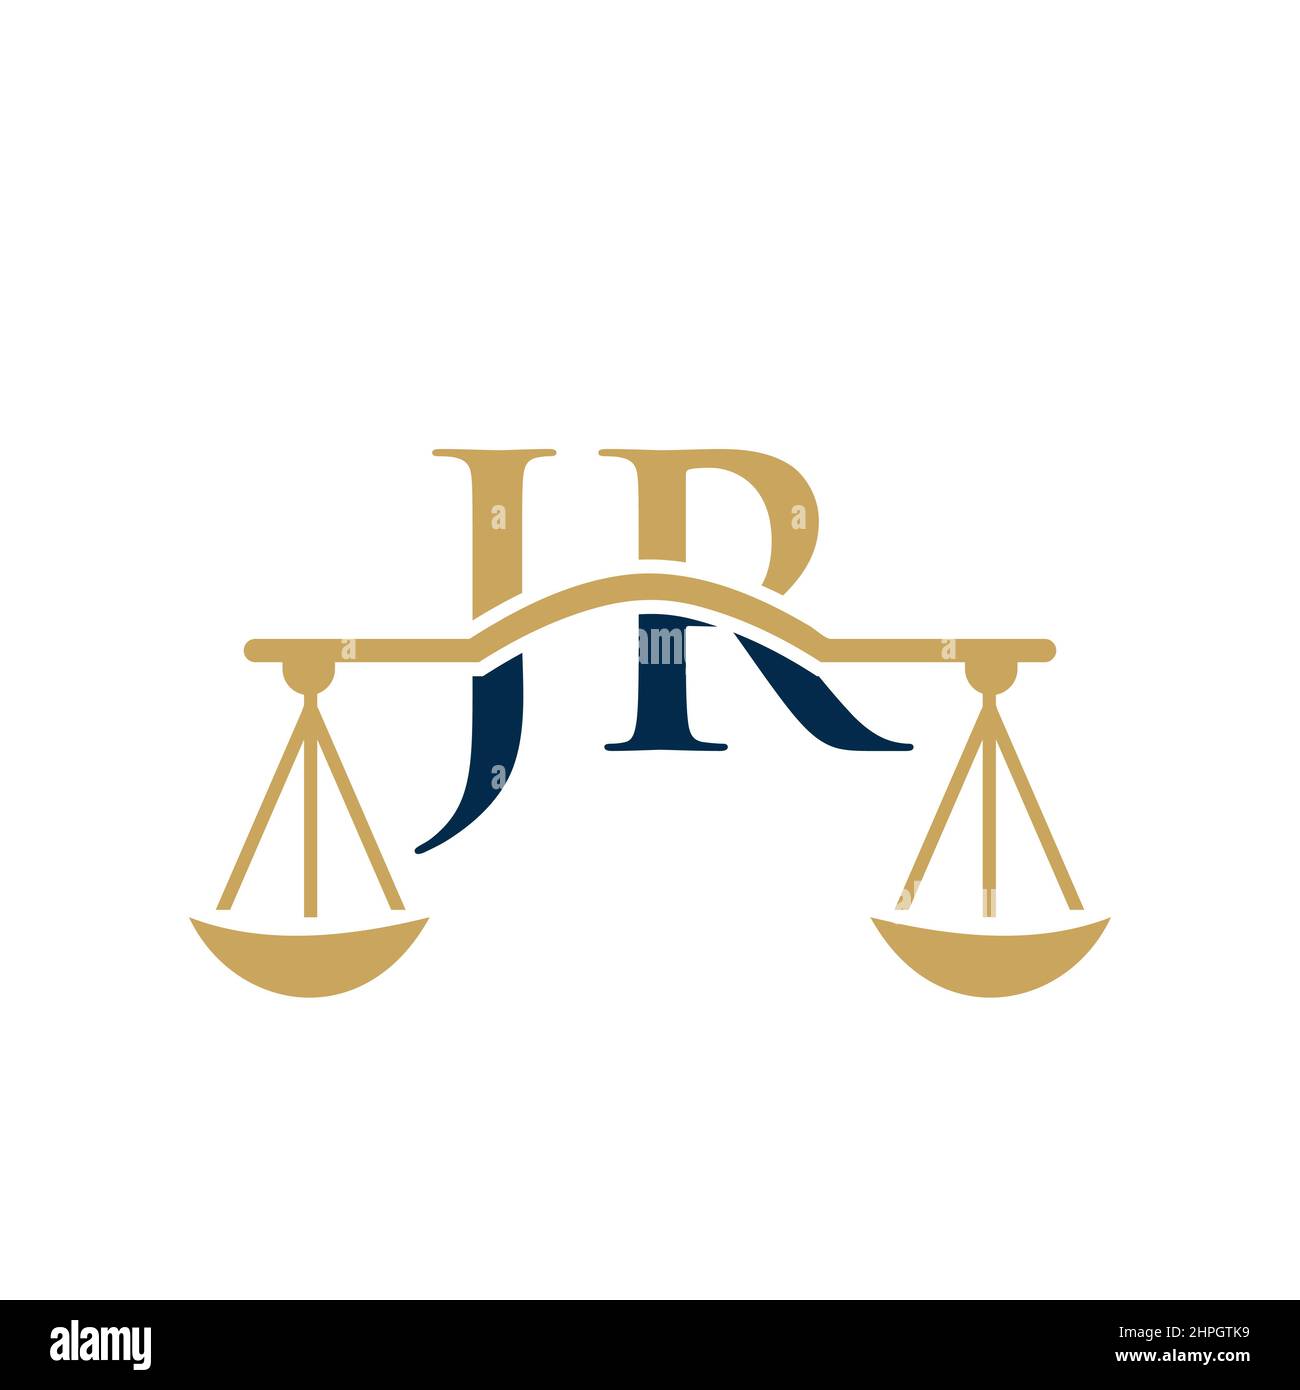 Law Firm Letter JR Logo Design. Lawyer, Law Attorney Lawyer Service, Law Office, Scale. Law Firm Logo On Letter JR Vector Sign Stock Vector